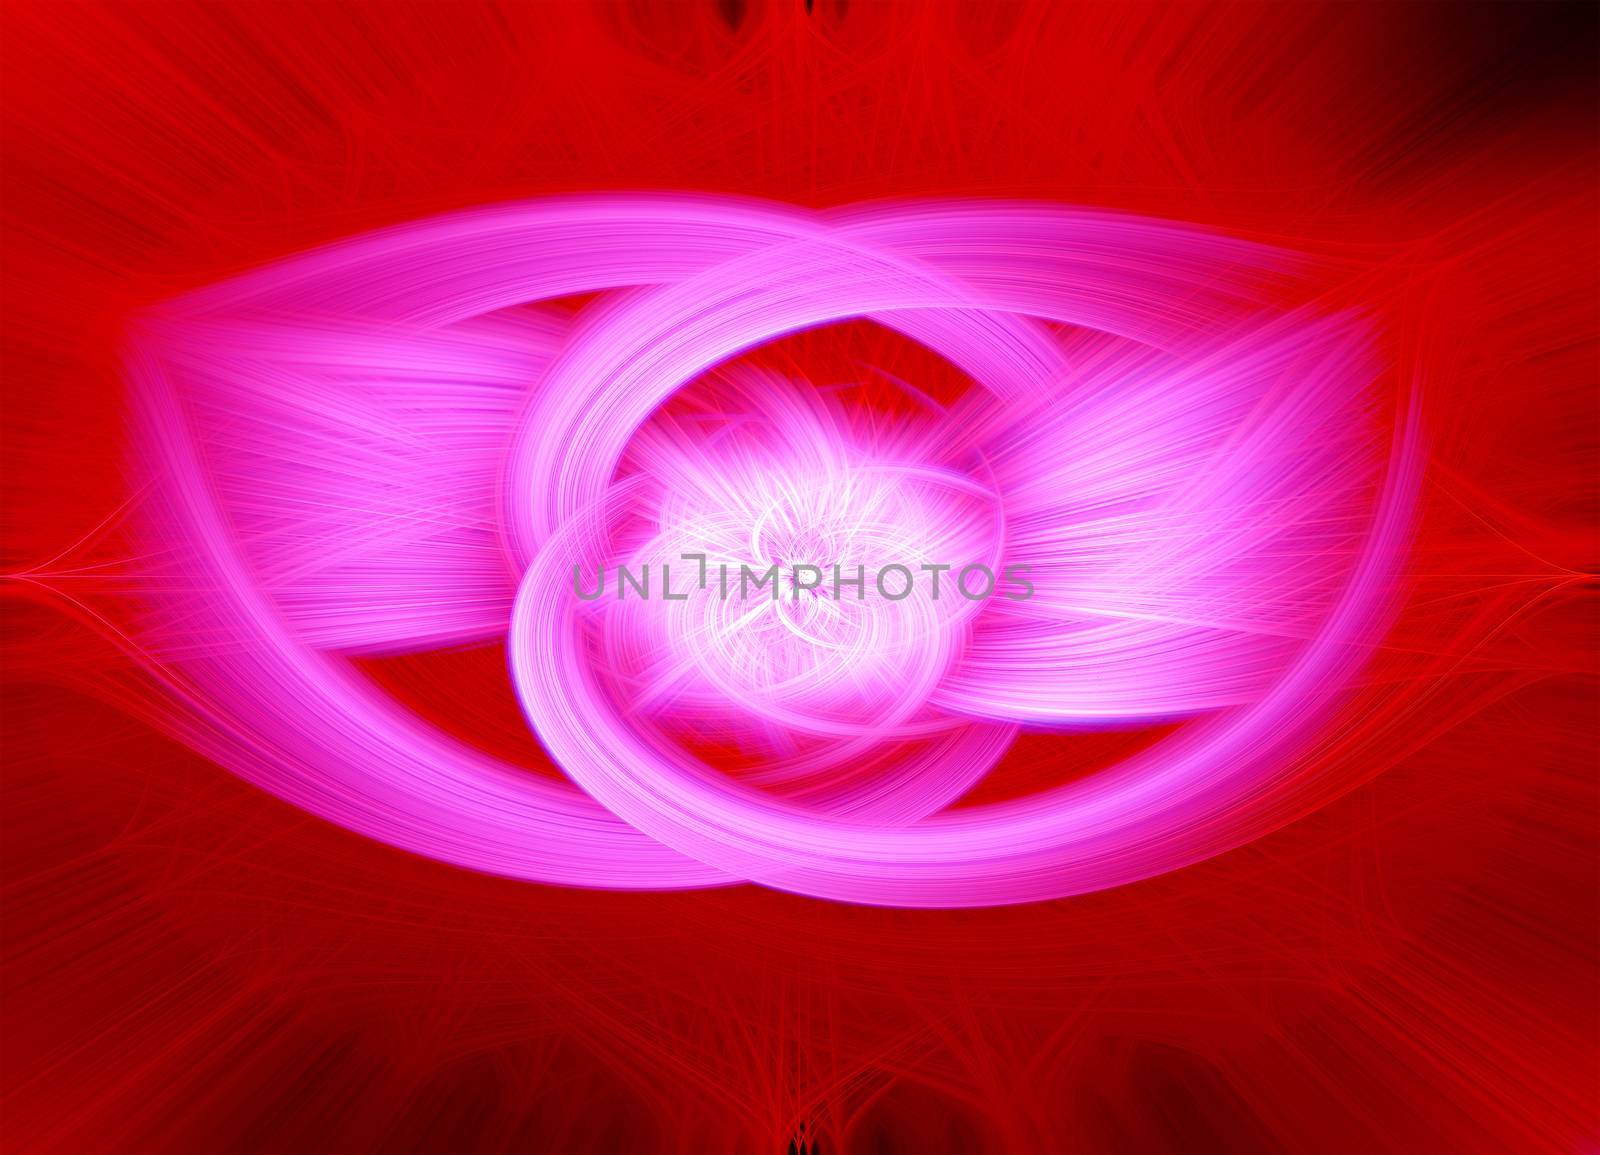 Beautiful abstract intertwined glowing 3d fibers forming a shape of sparkle, flame, flower, interlinked hearts. Maroon, white, red, and pink colors. Illustration by DamantisZ